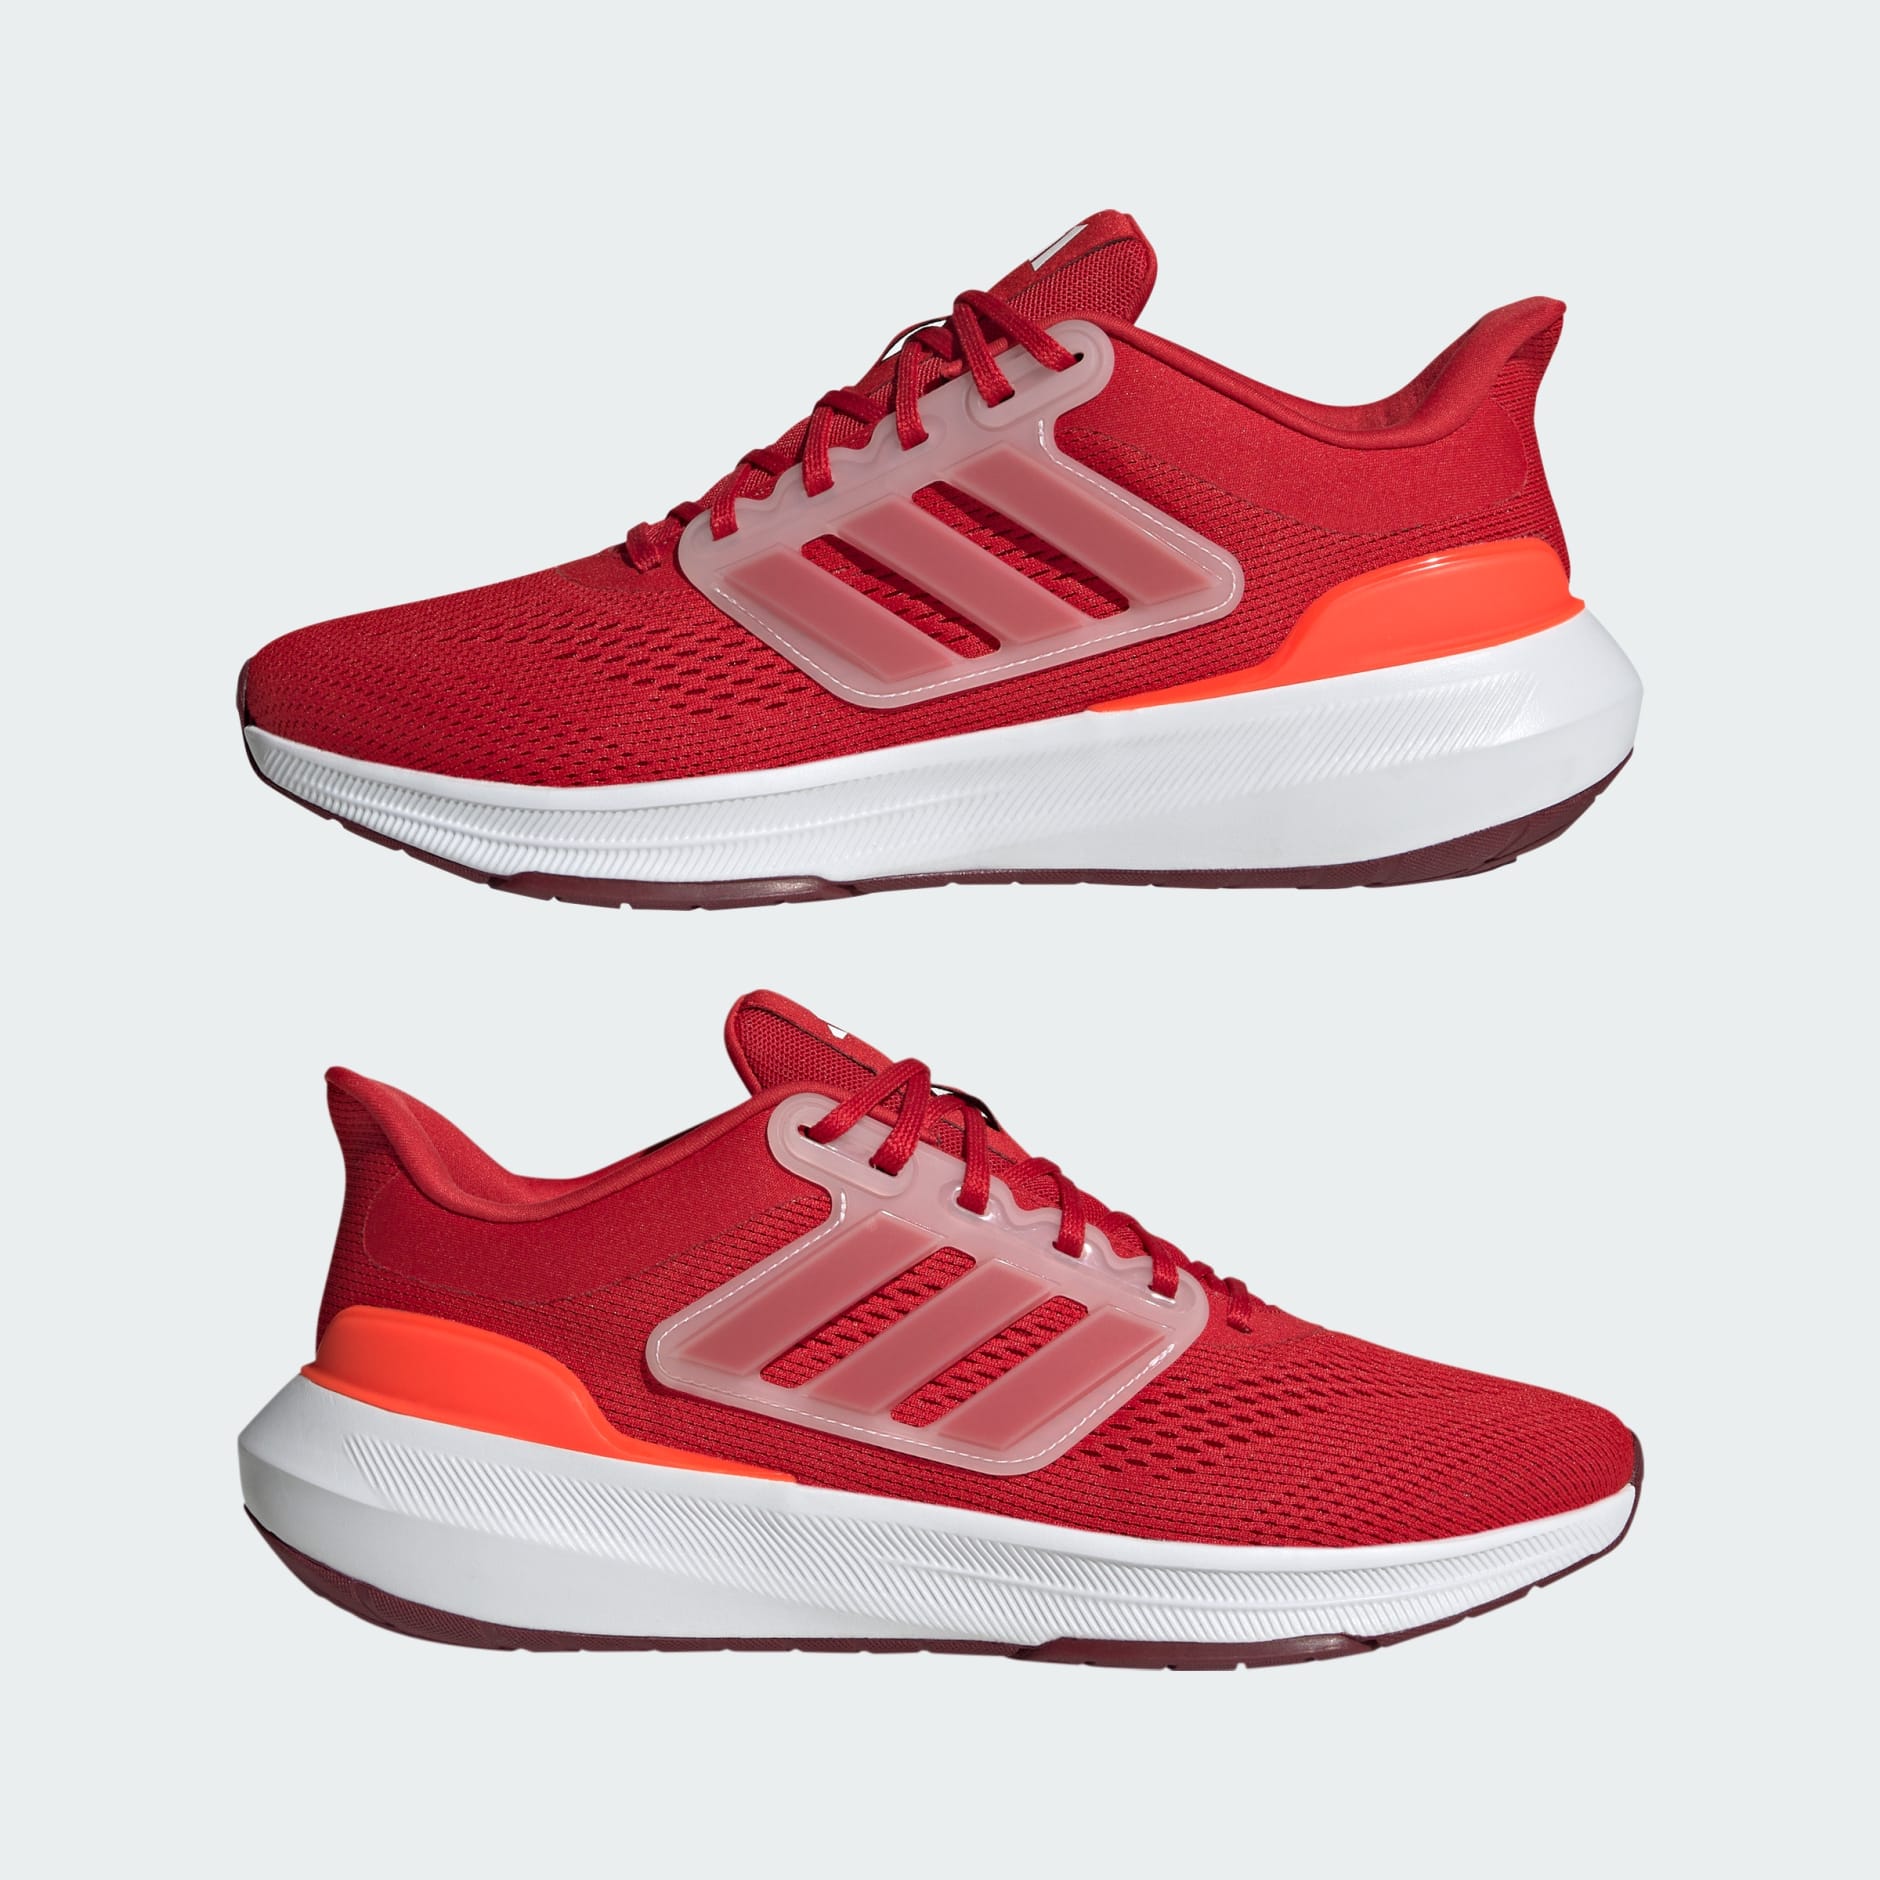 adidas Ultrabounce Shoes - Red adidas OM